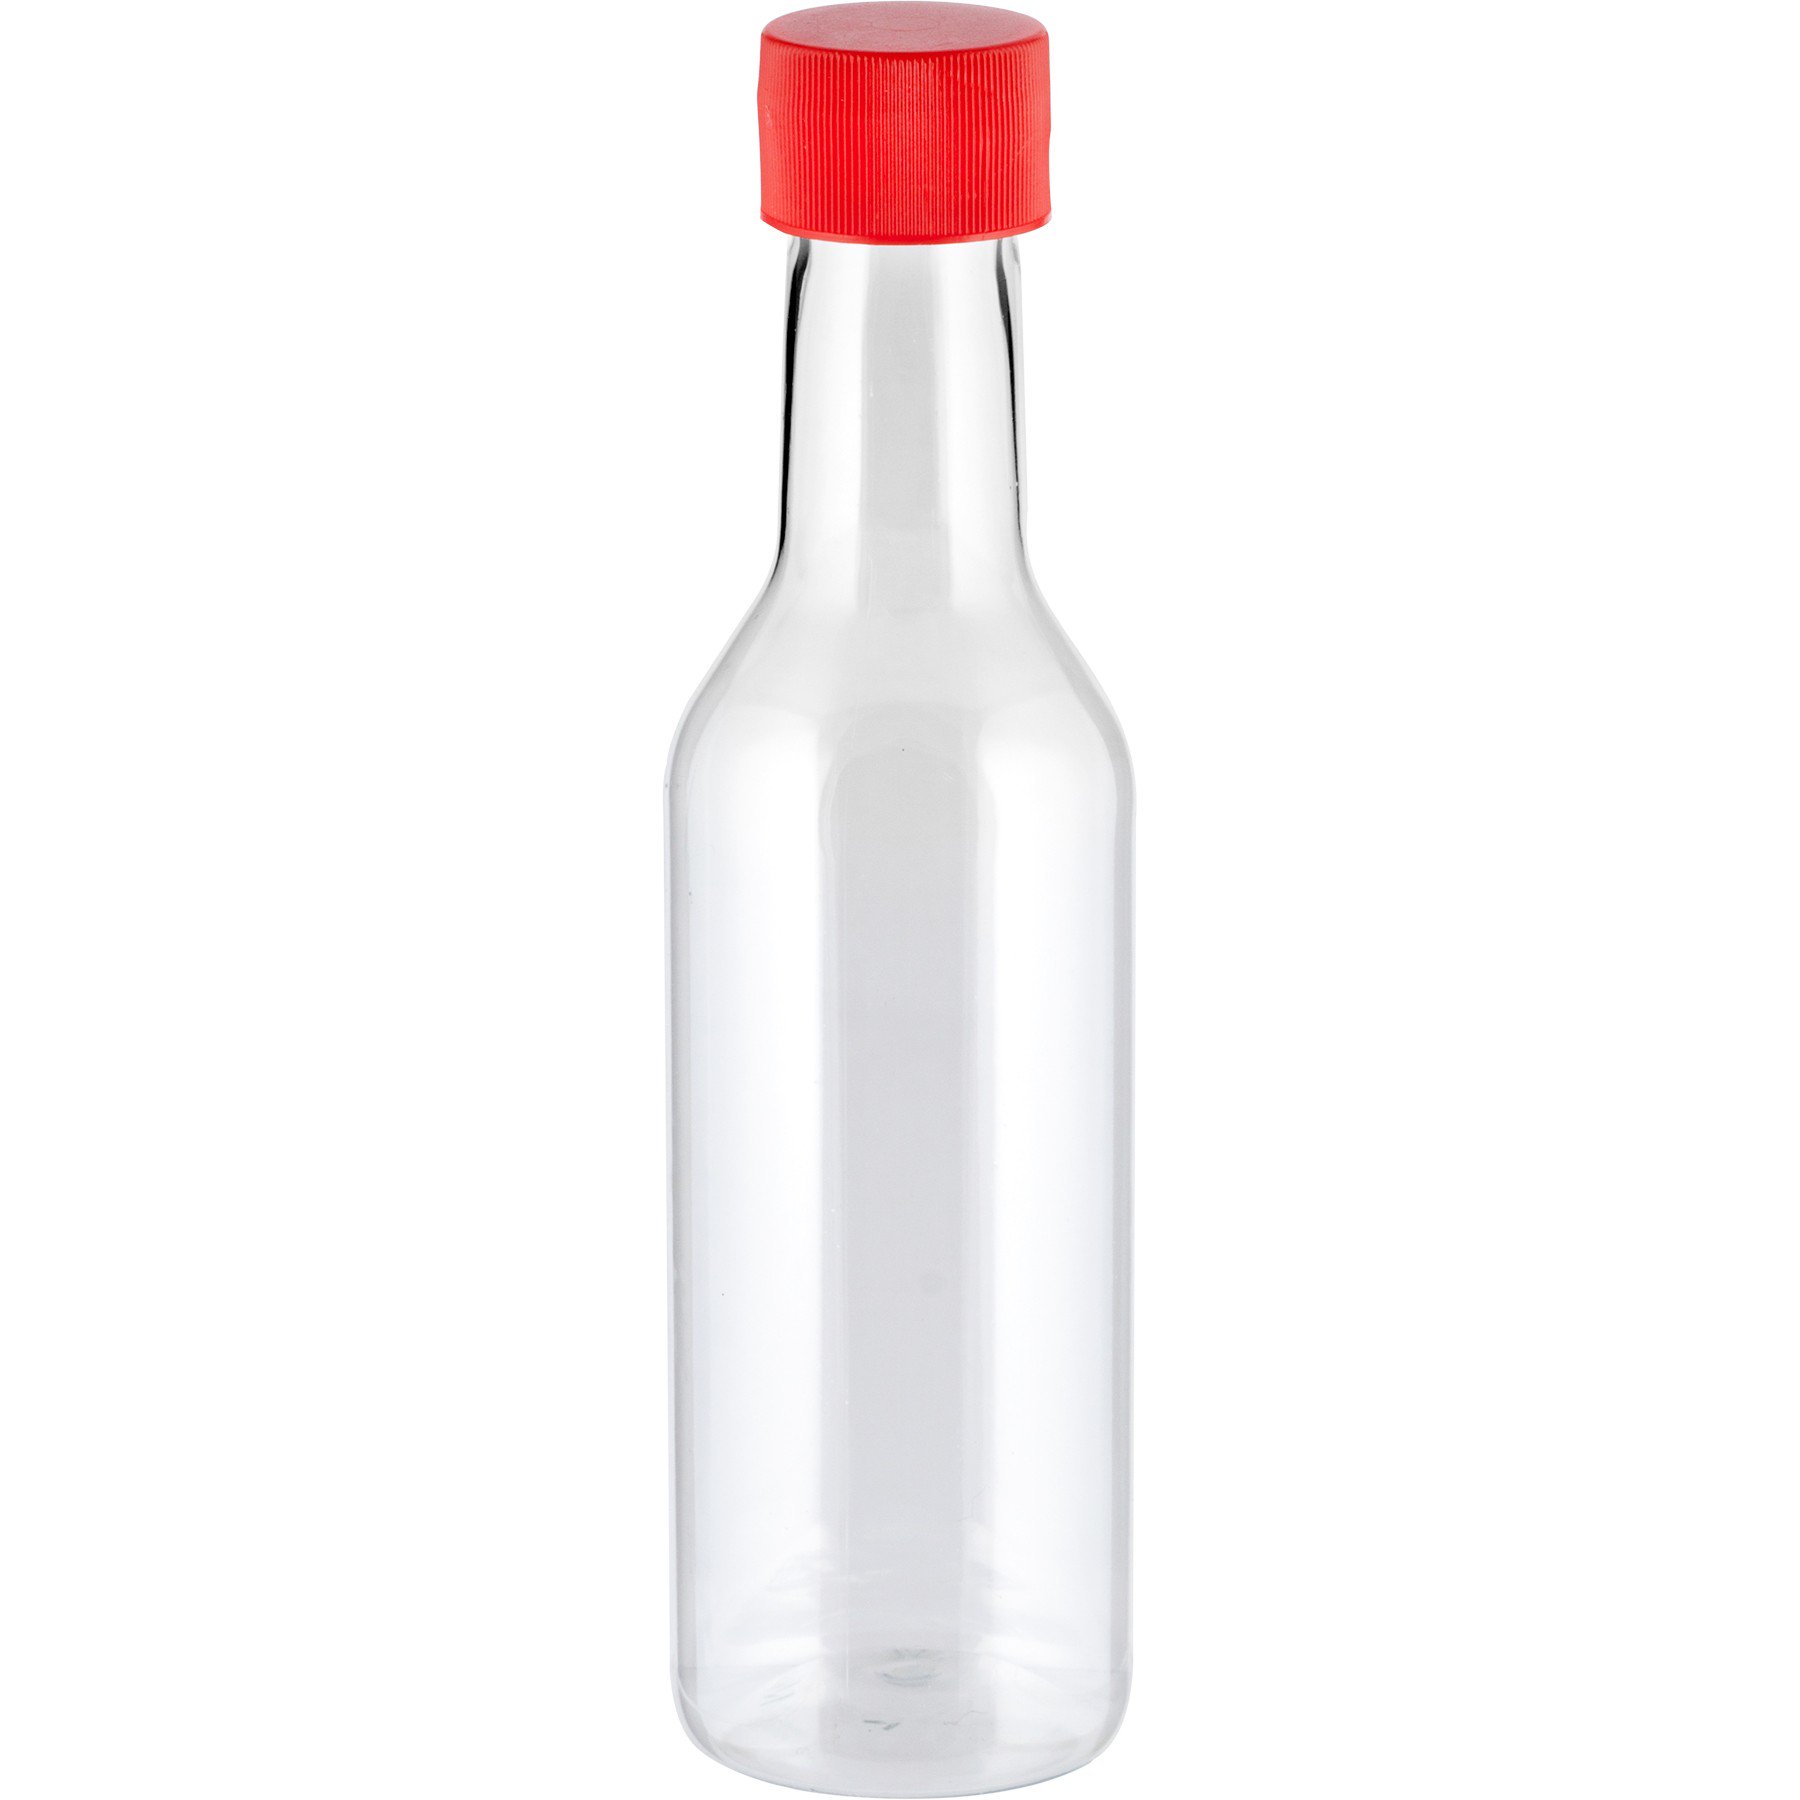 5 oz. Clear PET Plastic Hot Sauce Bottle w/Red Ribbed F217 Cap, 24mm ...